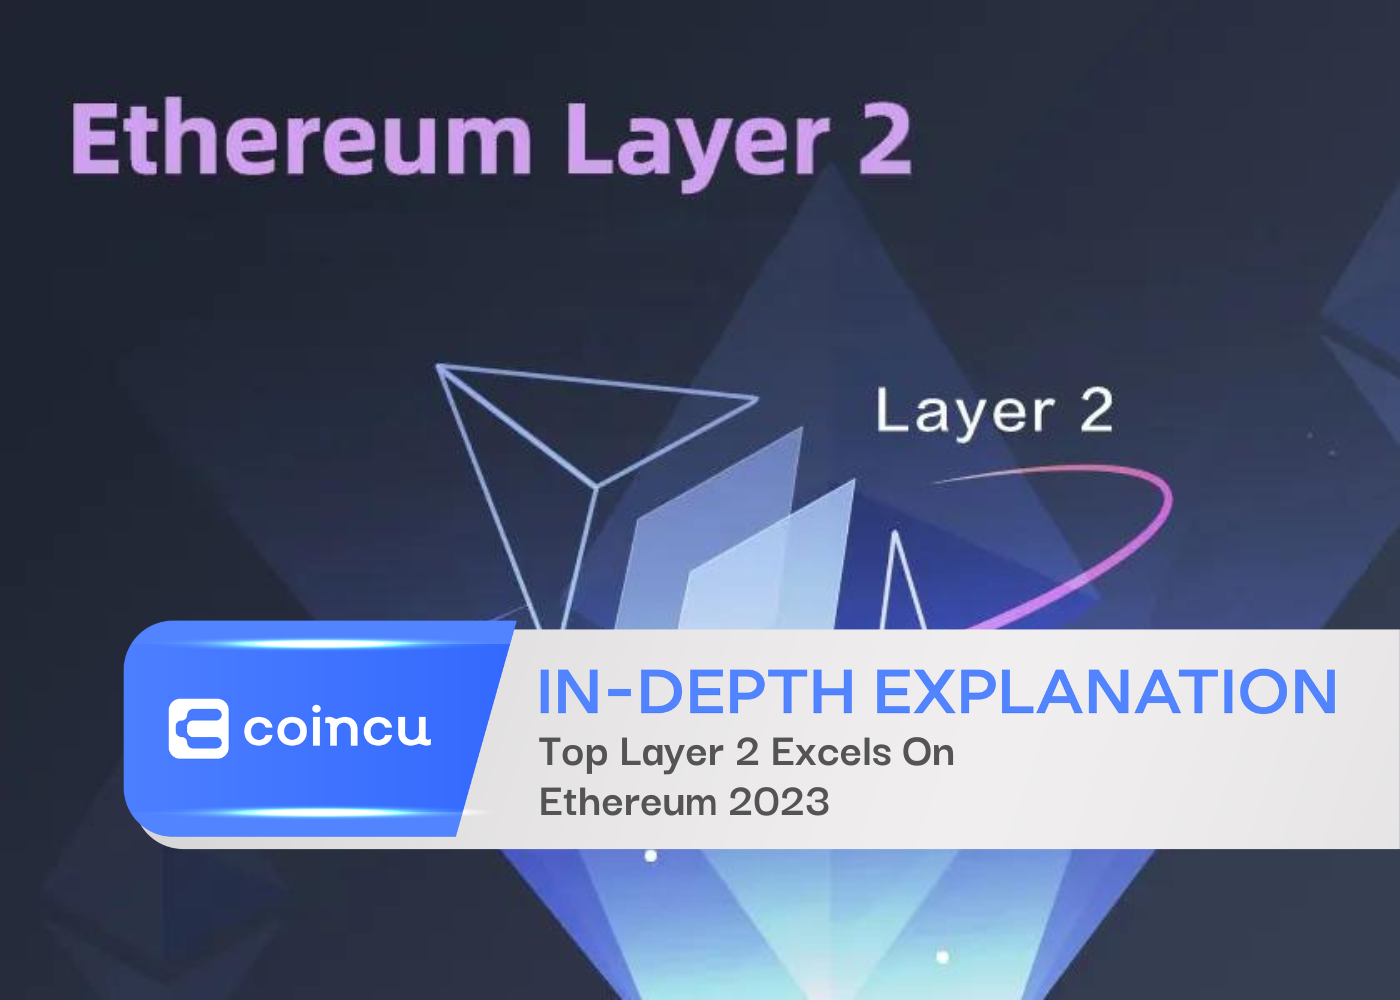 Top Layer 2 Excels On